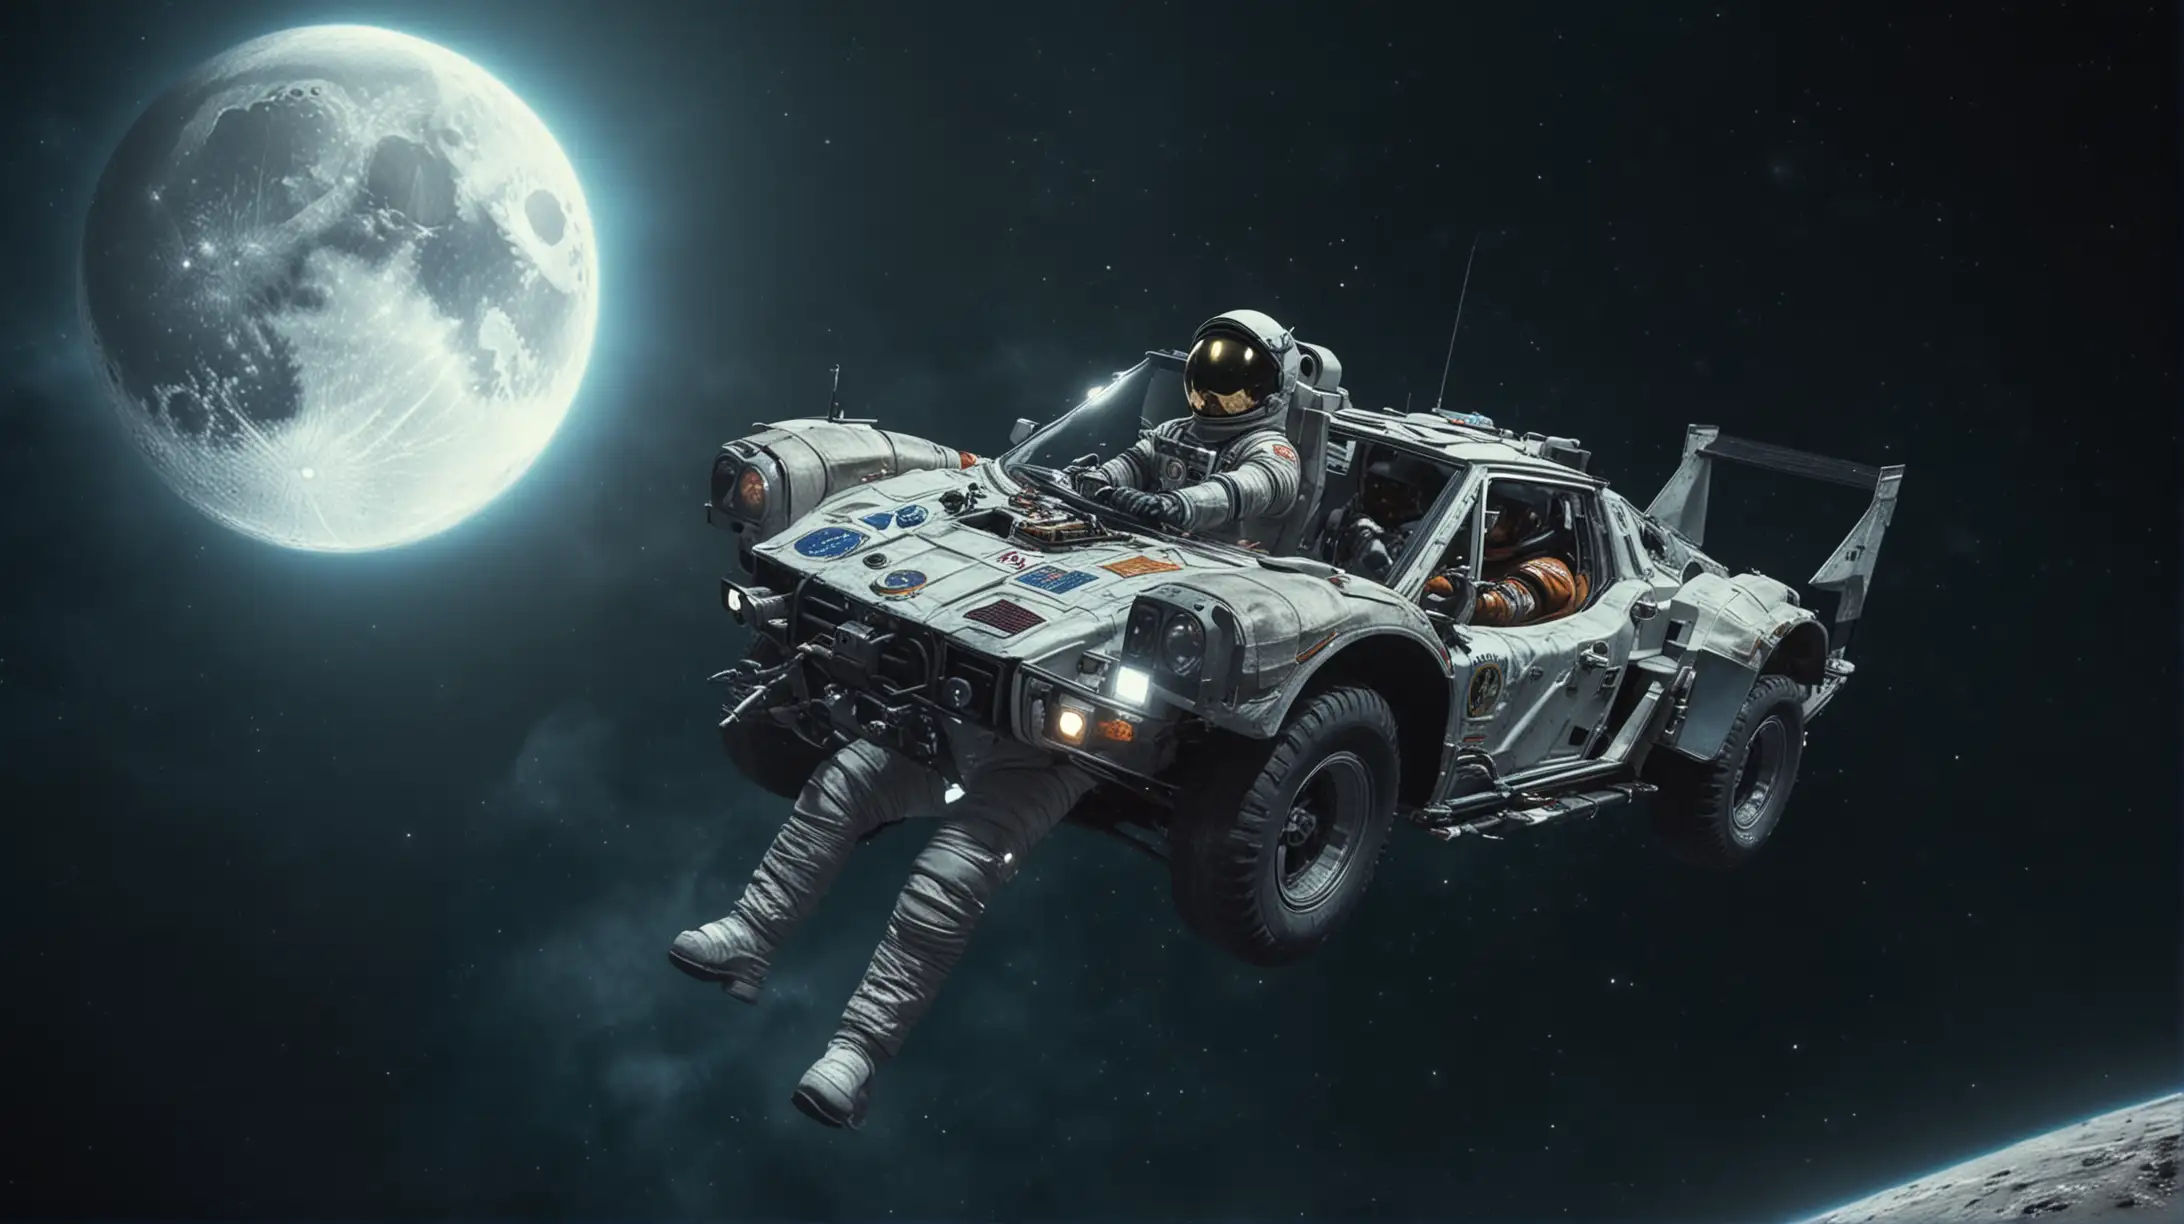 Car in space, moon in the background floating in space with driver in space suit driving

